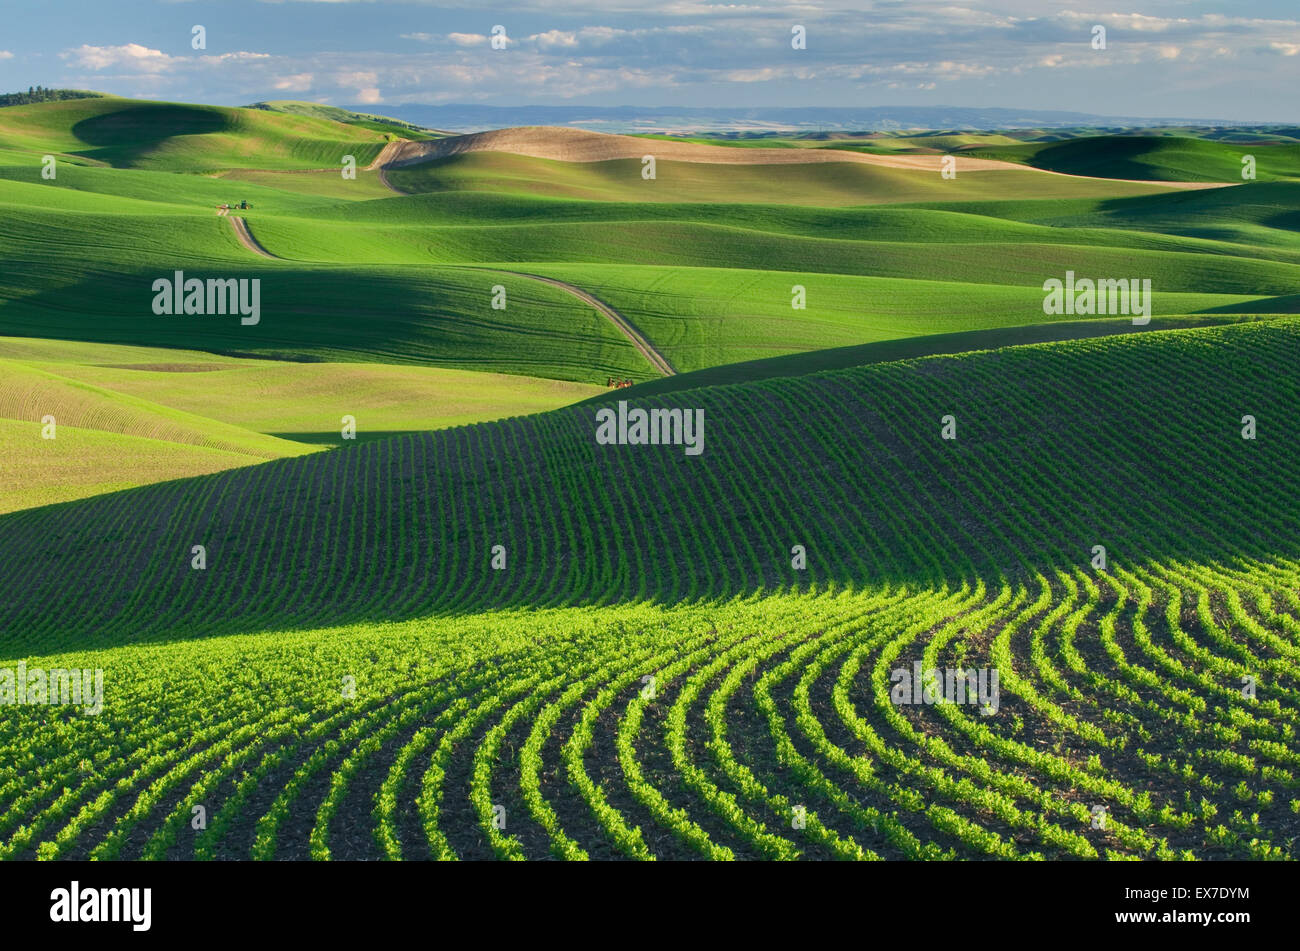 Rolling hills of green wheat fields in the Palouse region of the Inland Empire of Washington Stock Photo